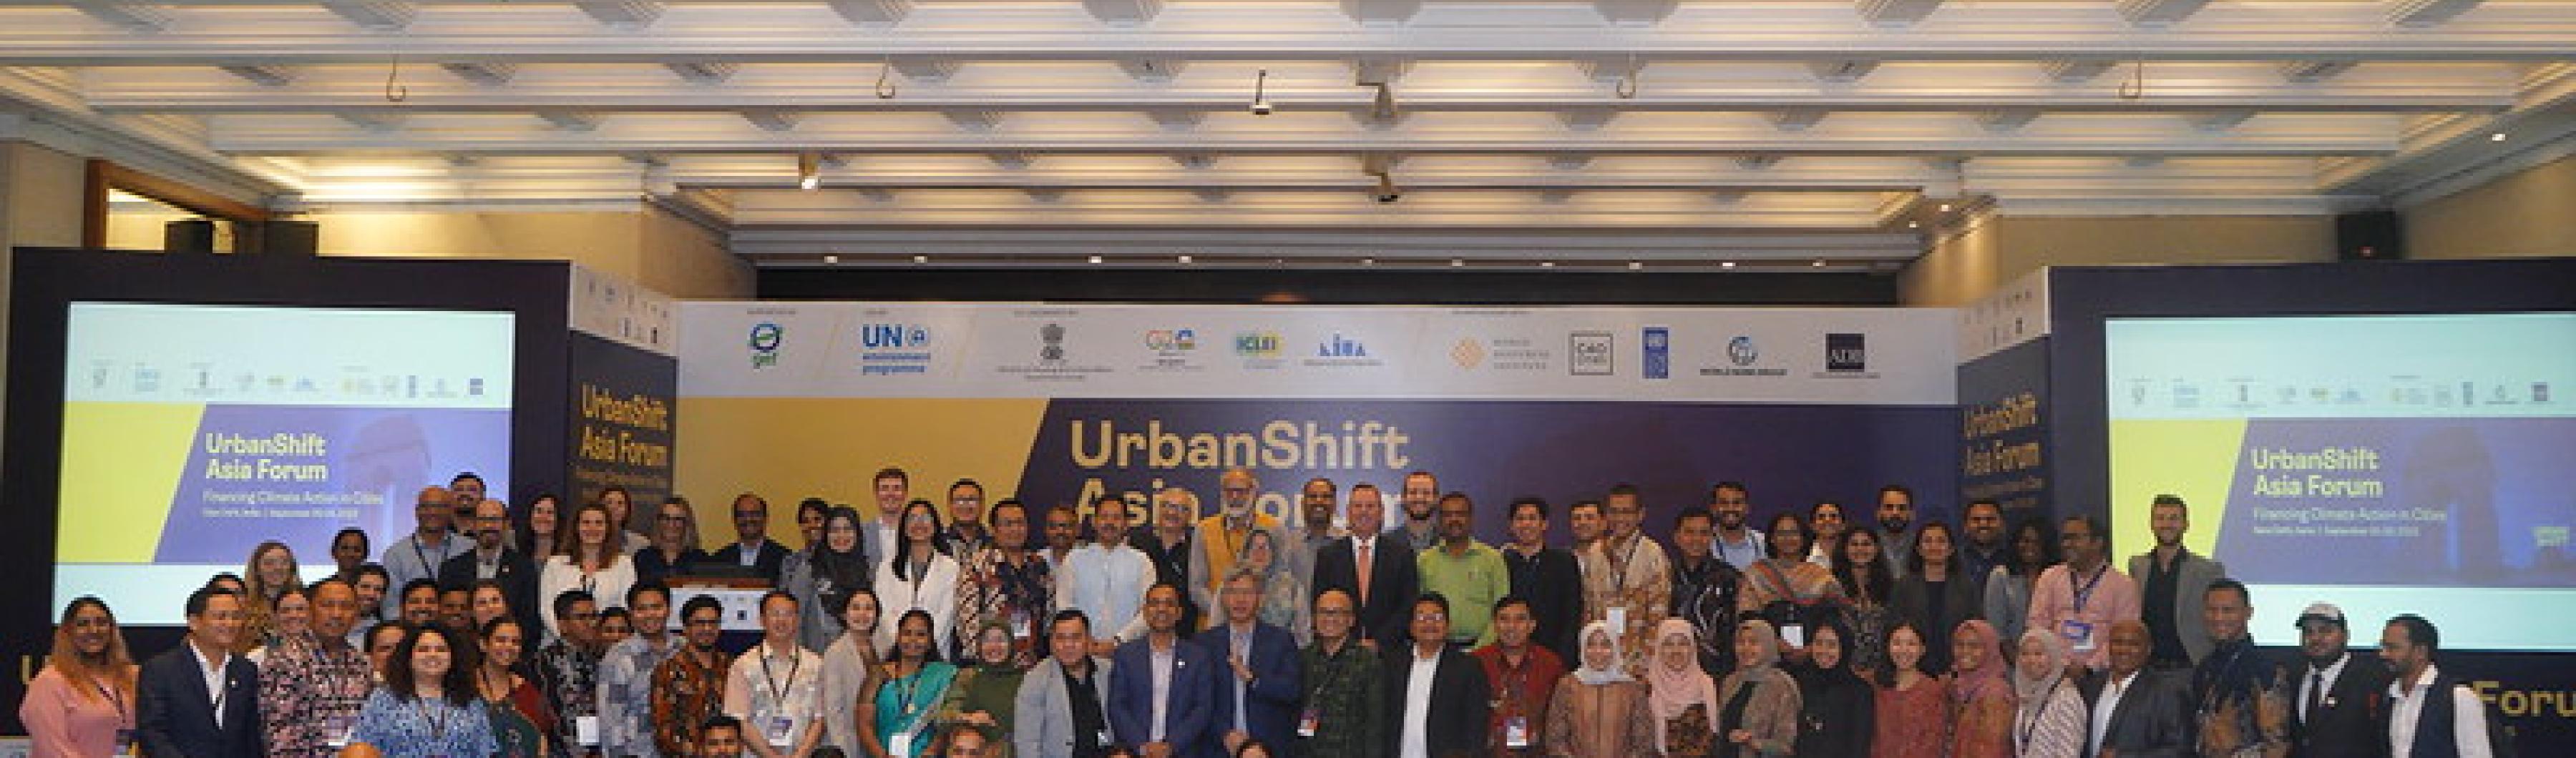 Participants in the UrbanShift Asia Forum gather for a group photo